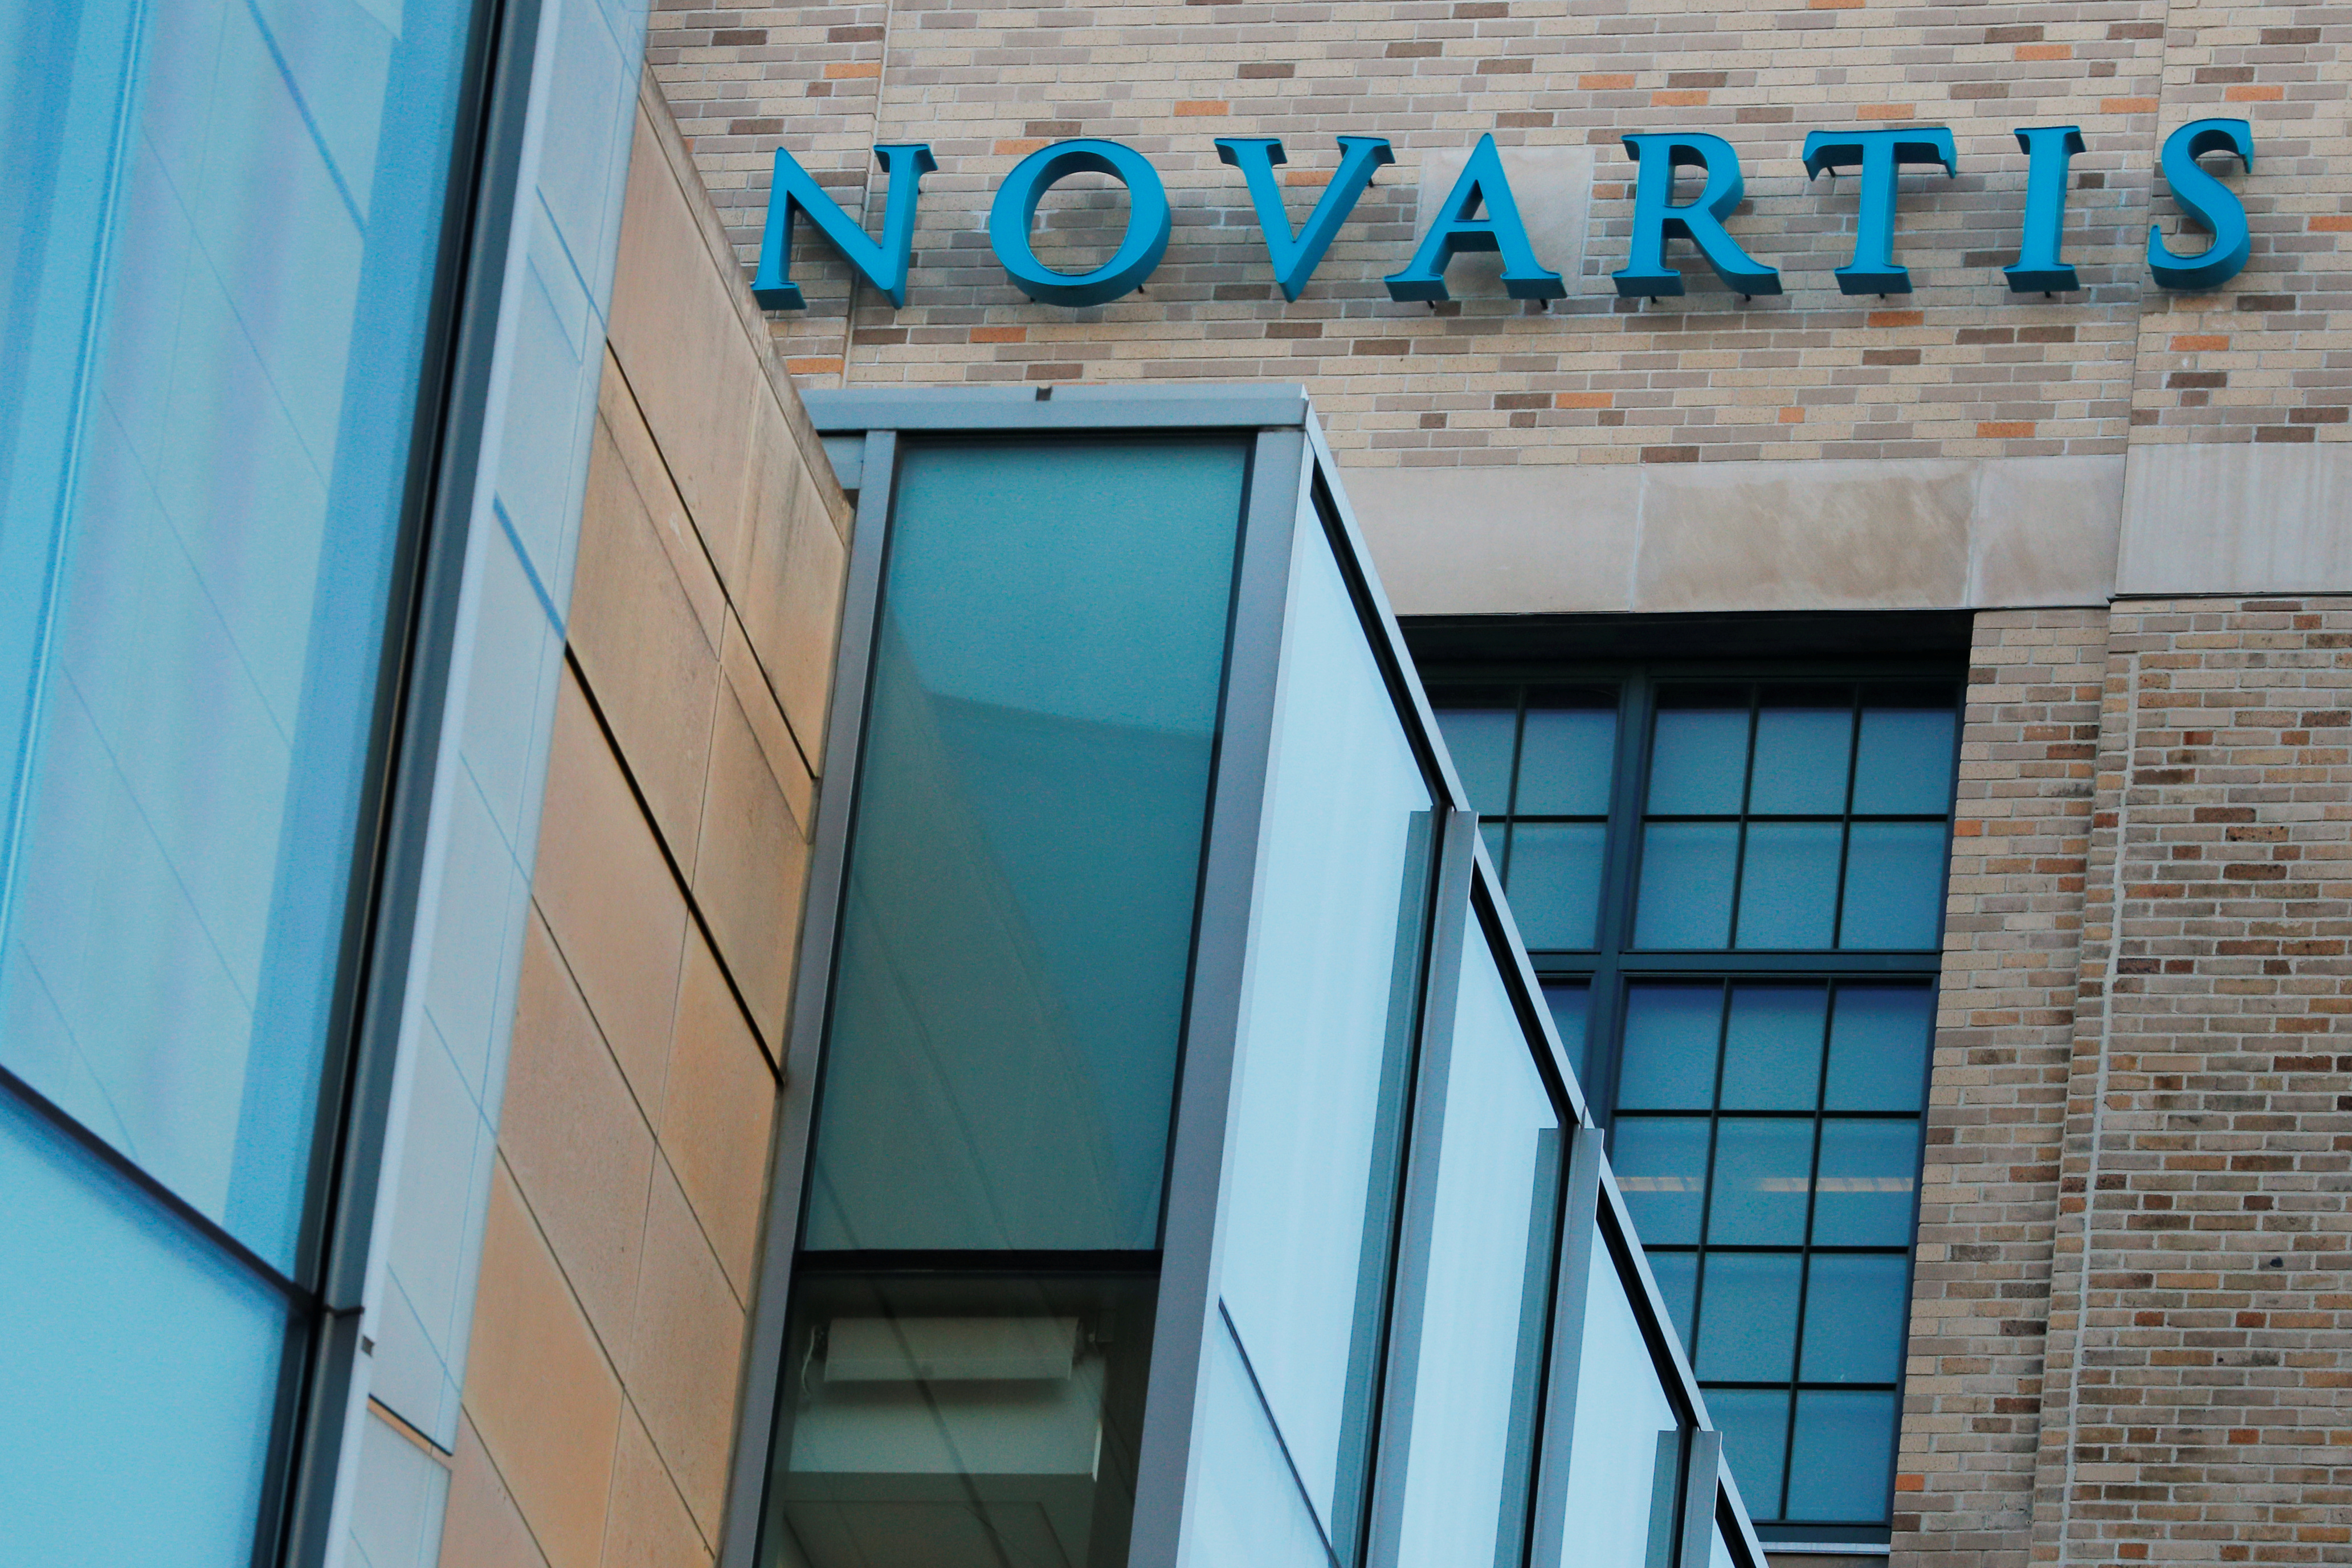 A sign marks Novartis' Institutes for Biomedical Research in Cambridge